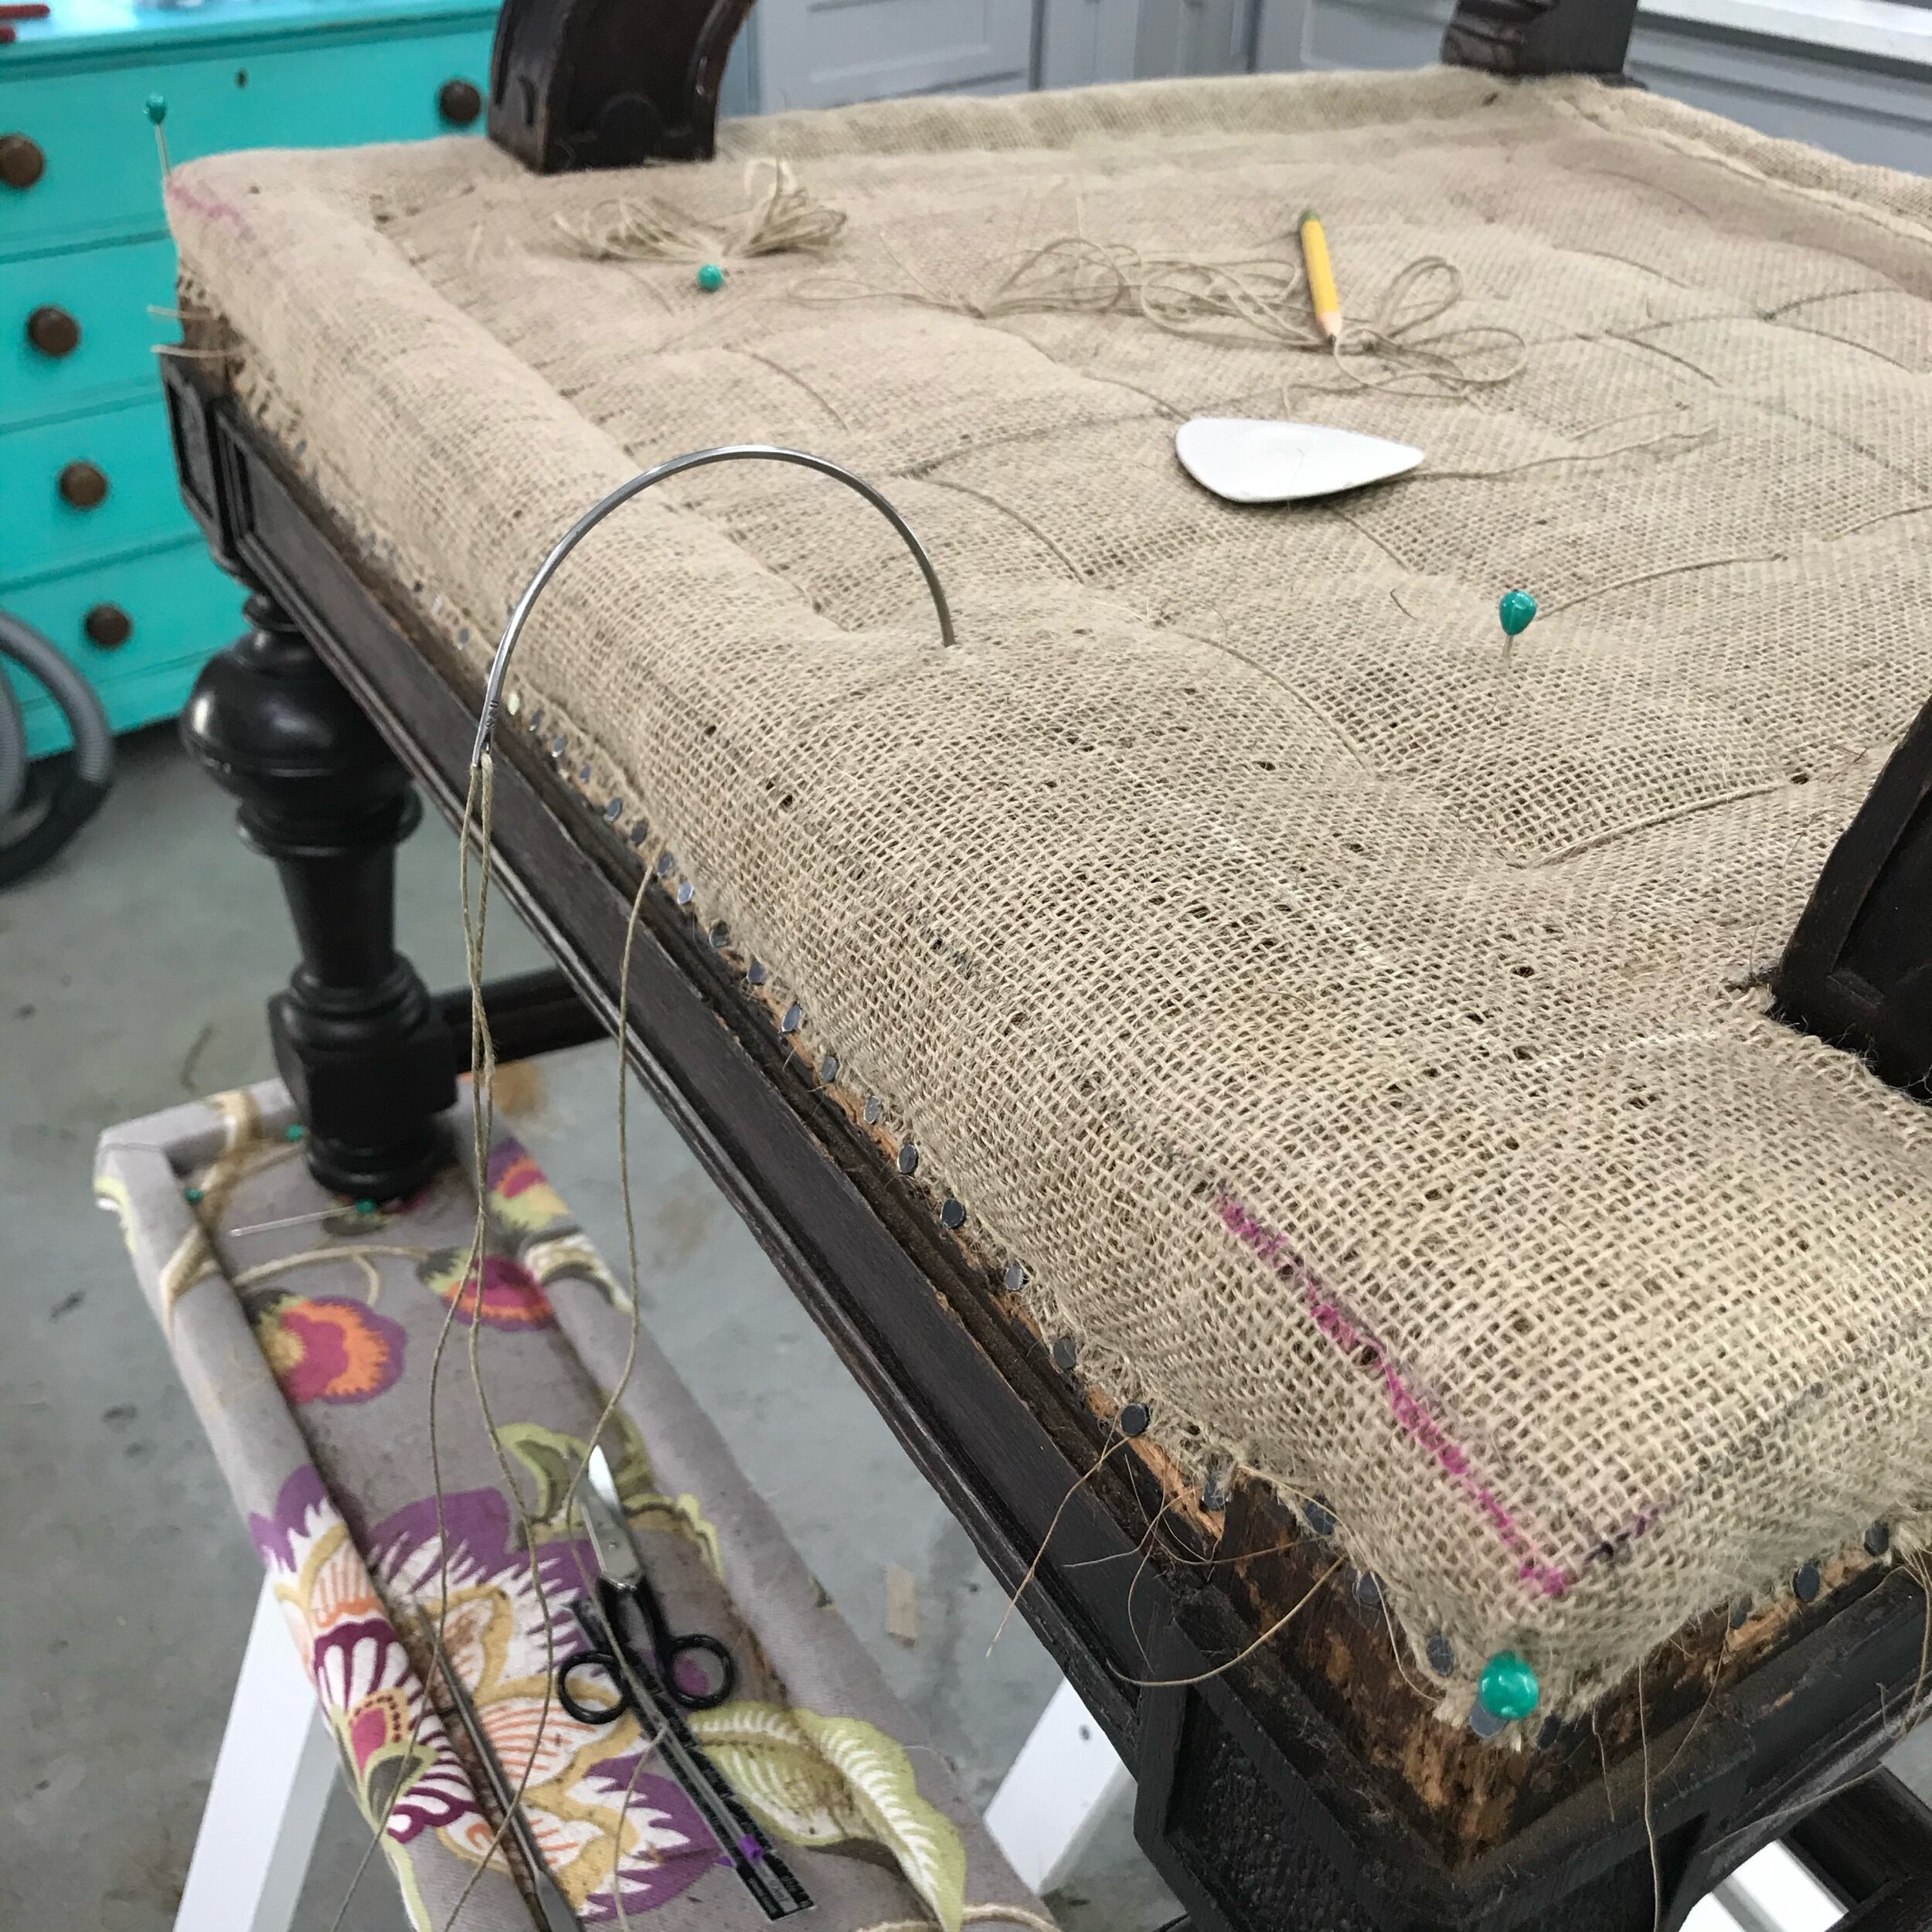 First topstitch row over coir for seat edge roll